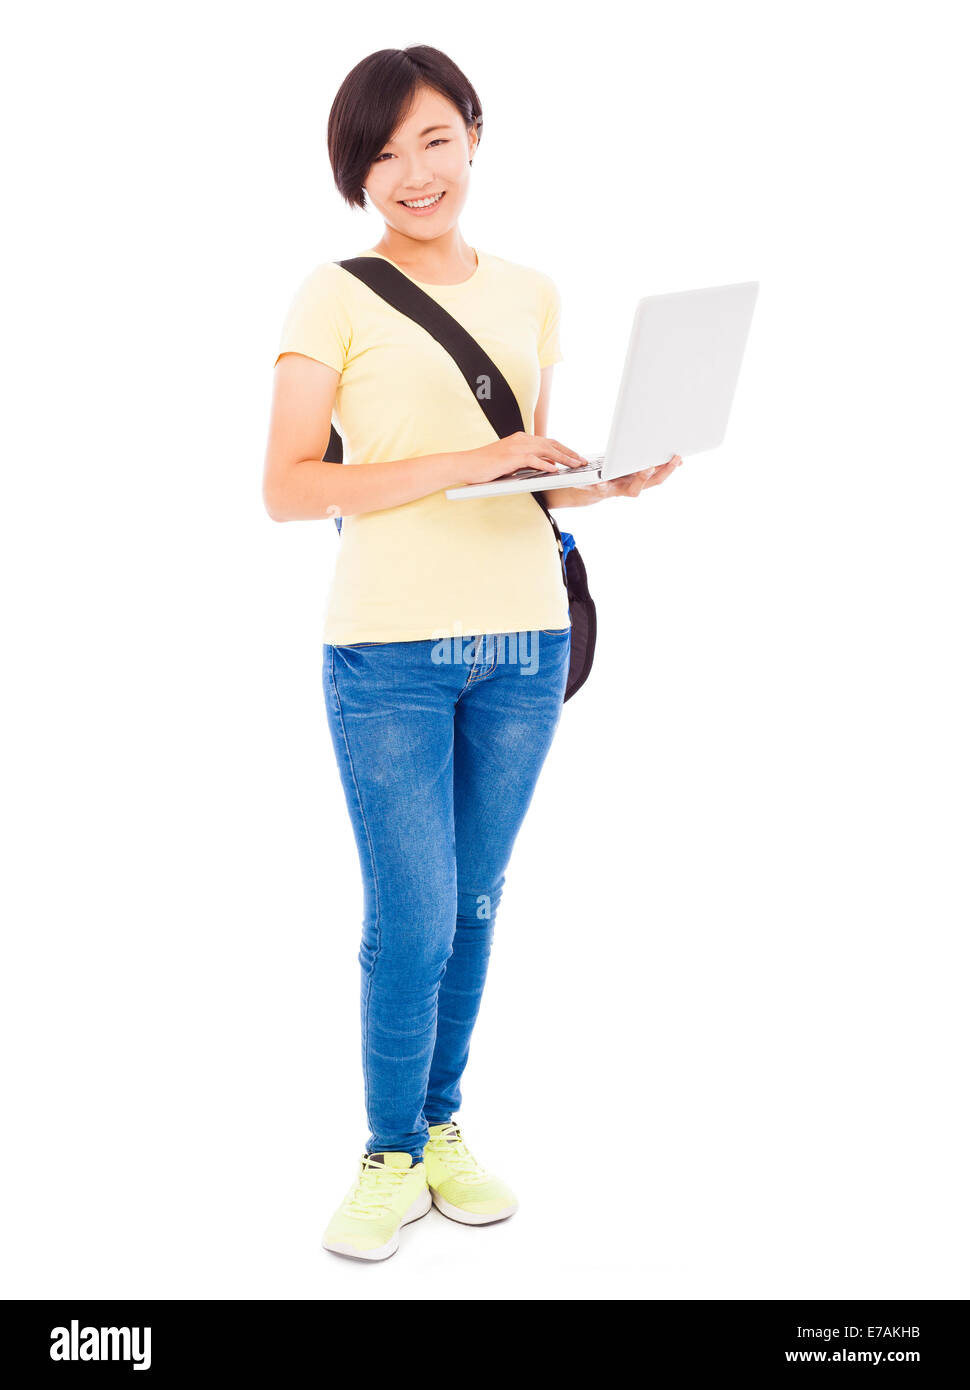 Smiling young woman holding a laptop over white background Stock Photo